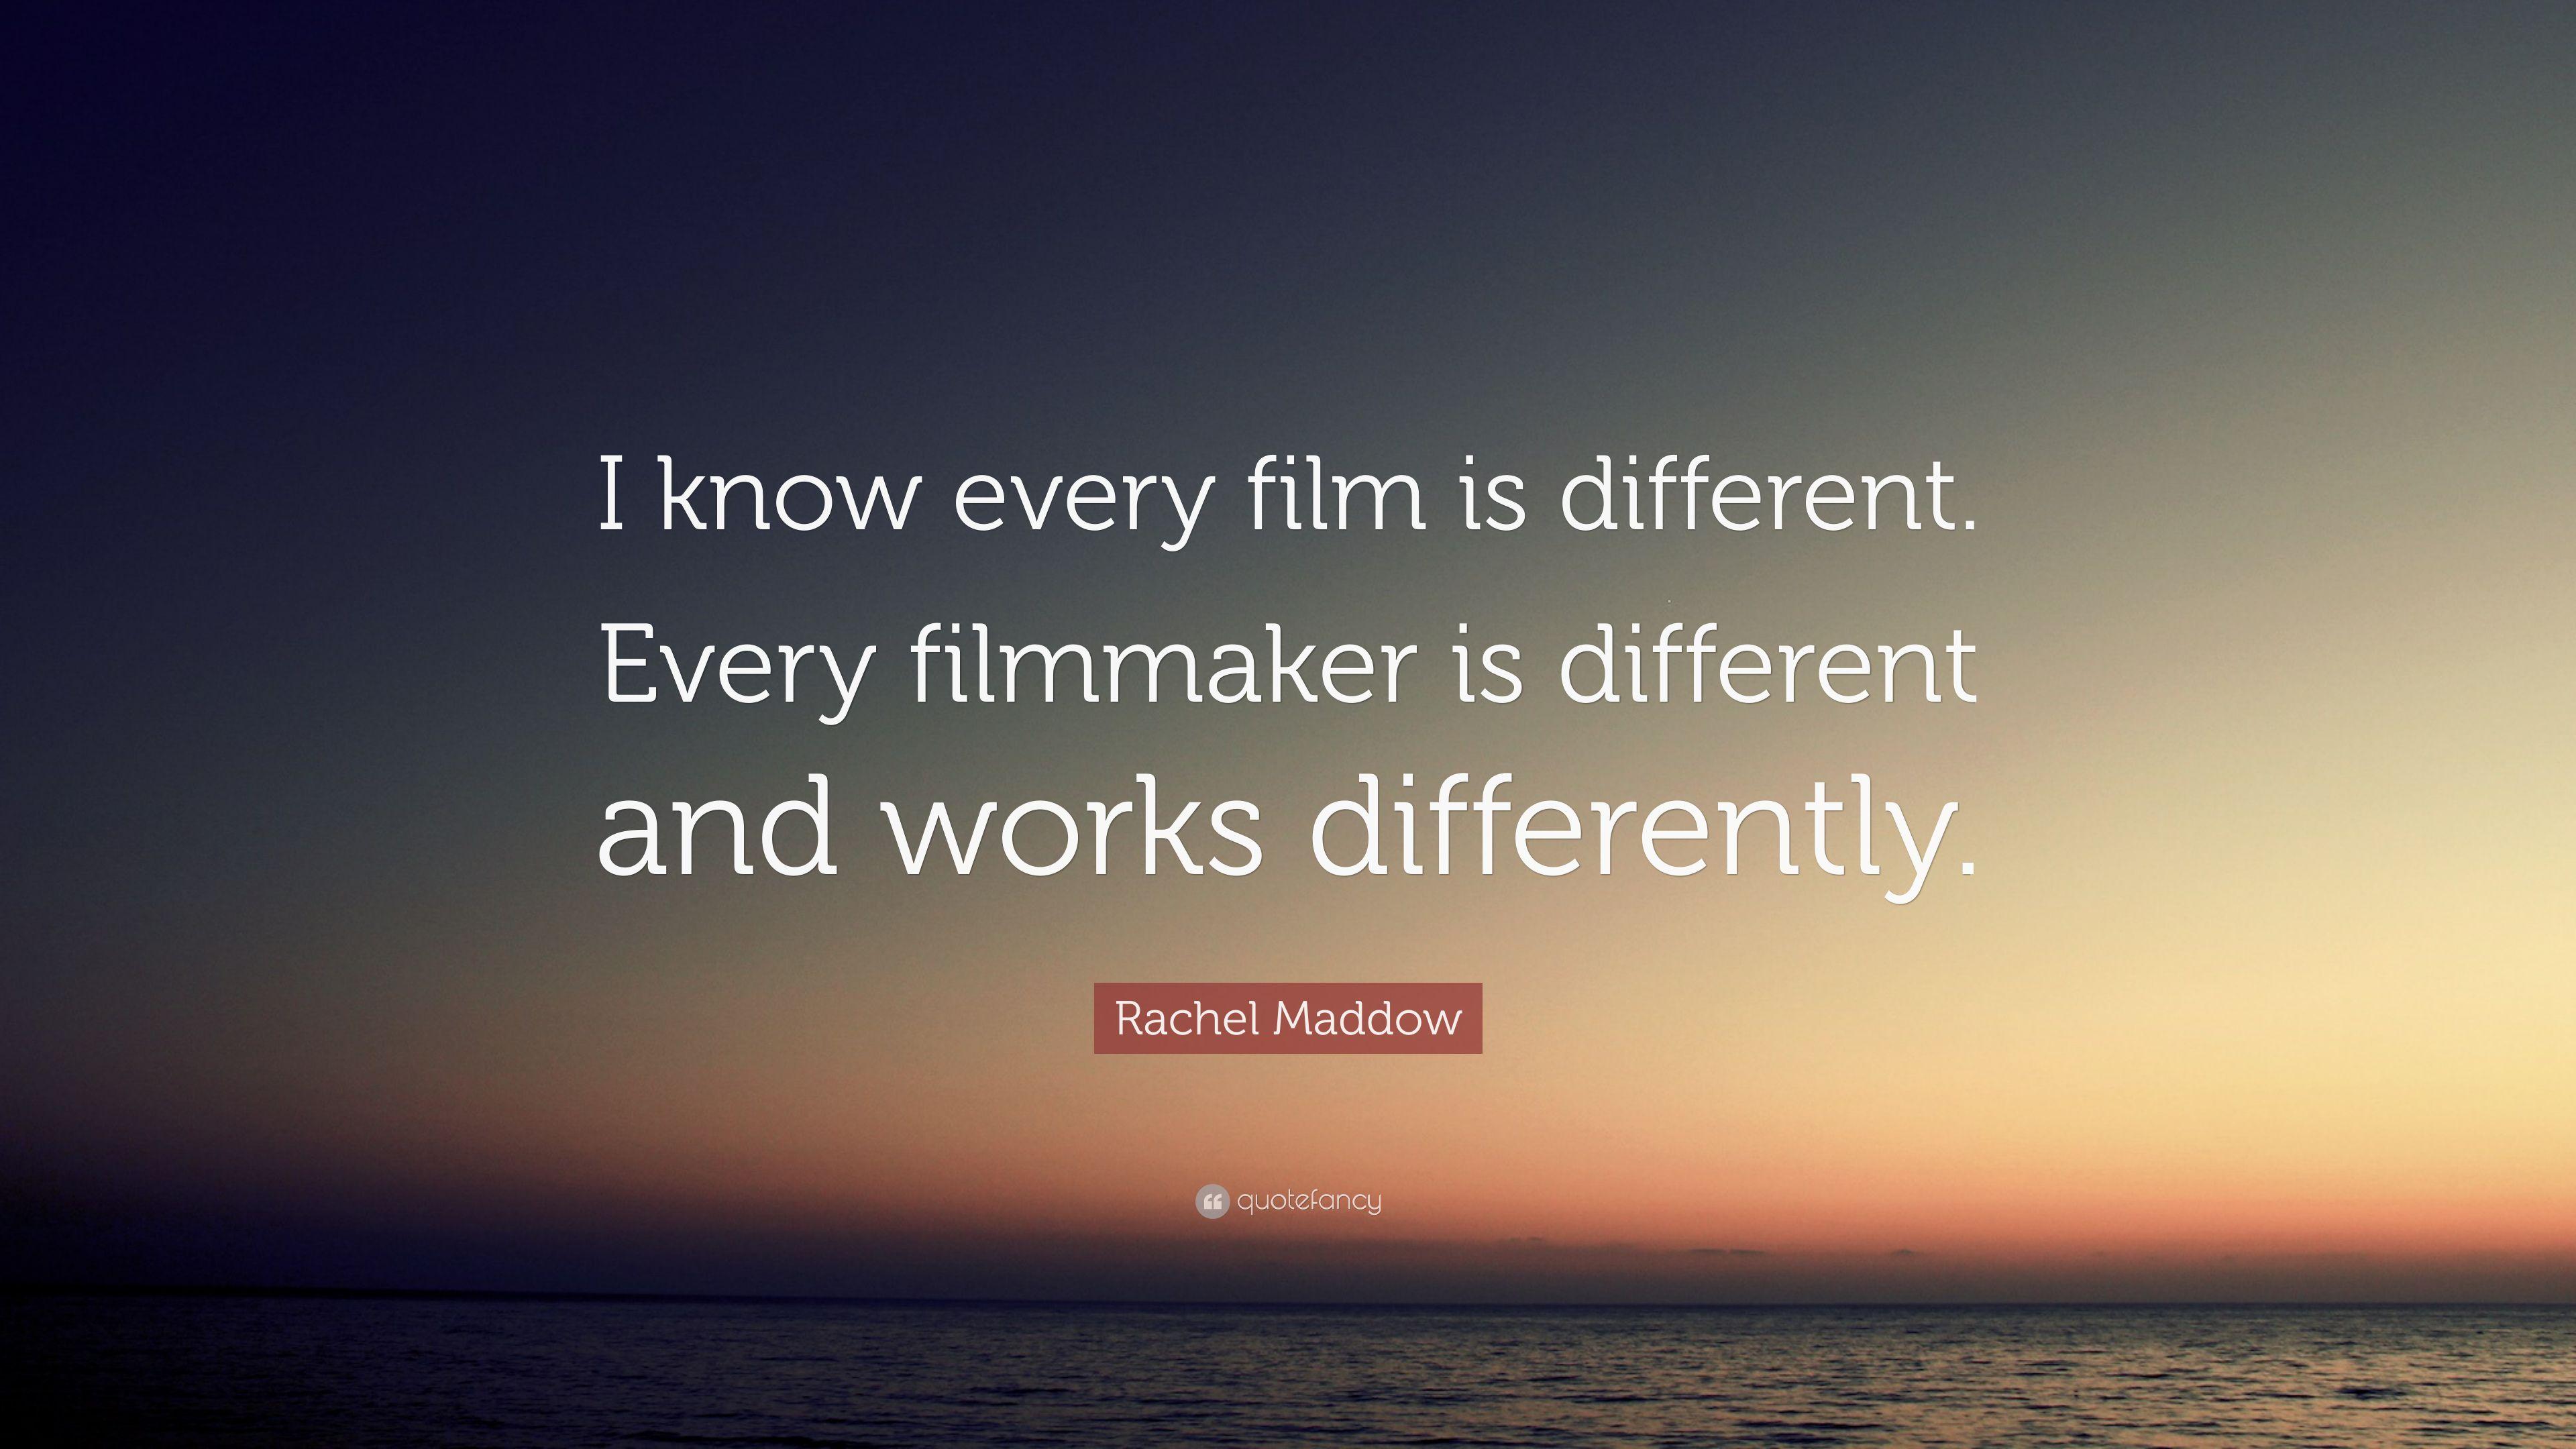 Rachel Maddow Quote: “I know every film is different. Every